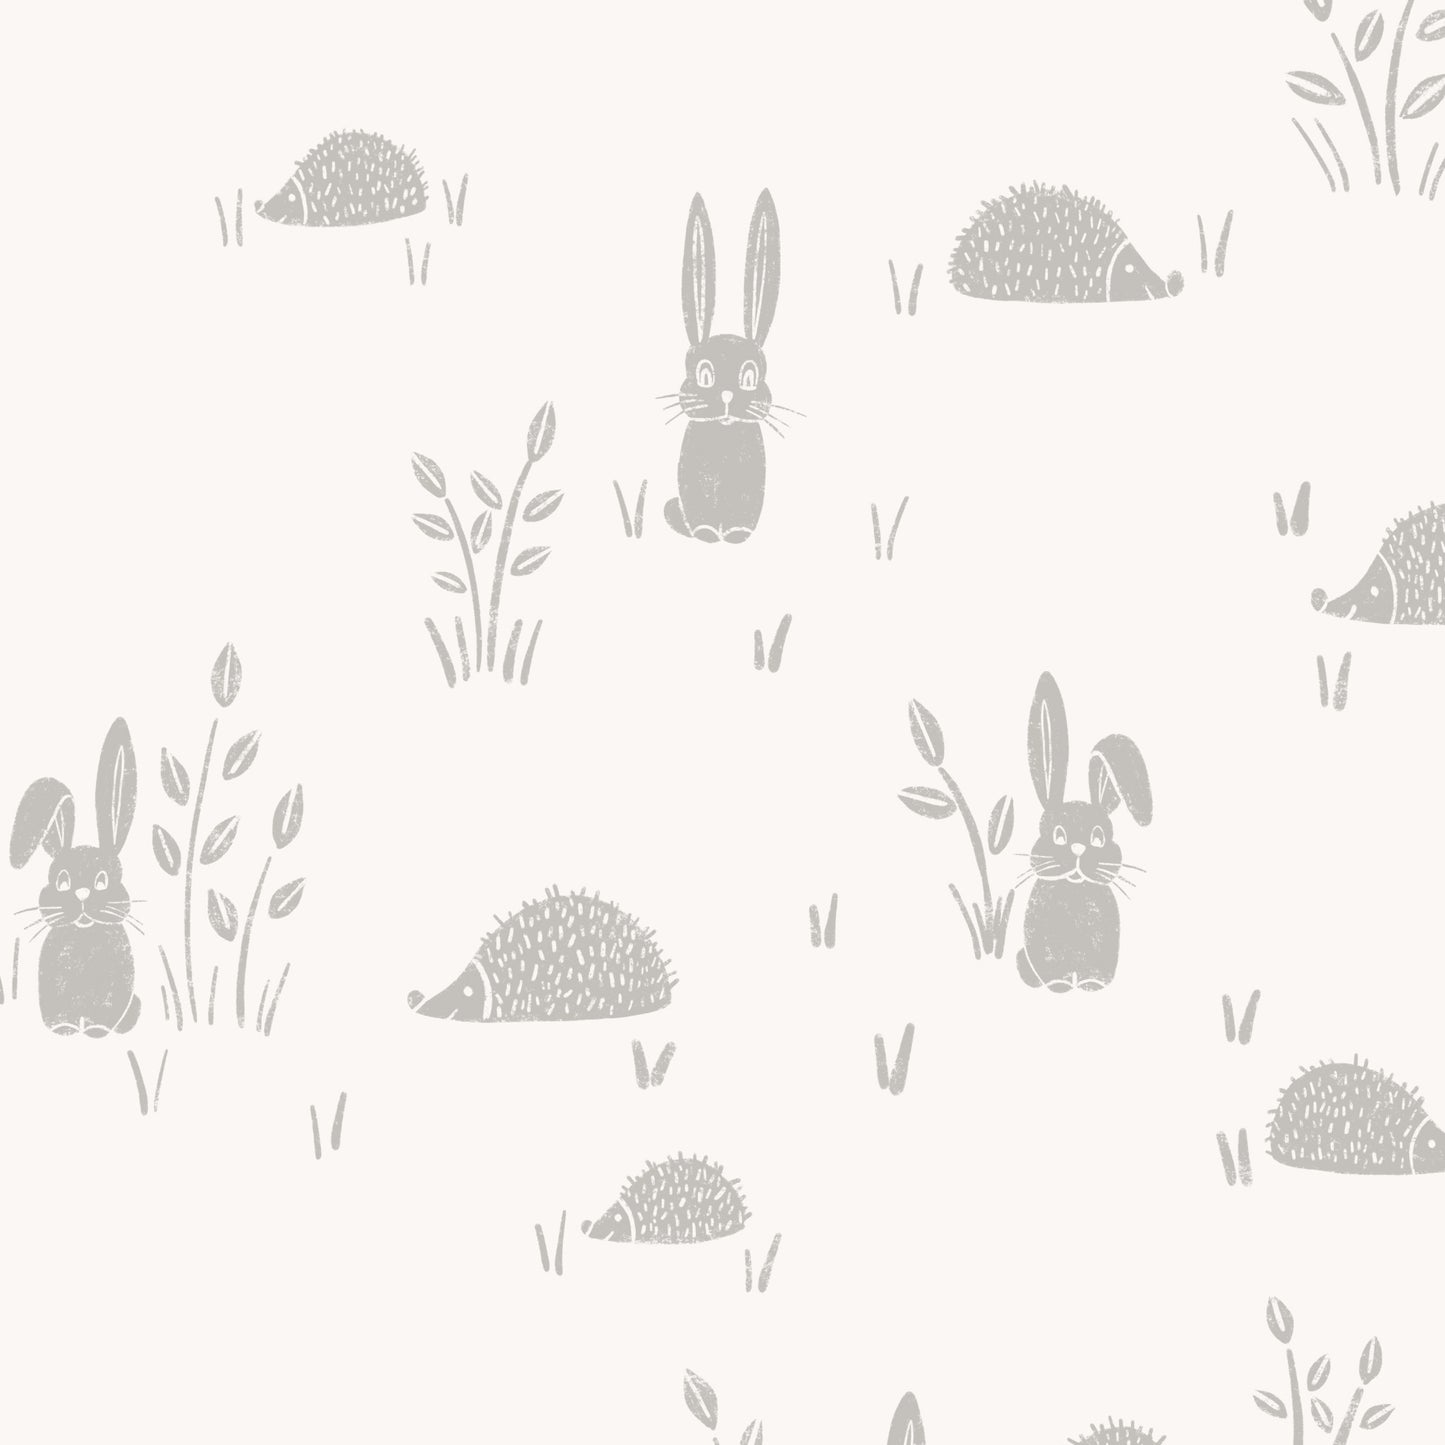 Hedgehogs and Rabbits Wallpaper in Gray shown in a close up view.